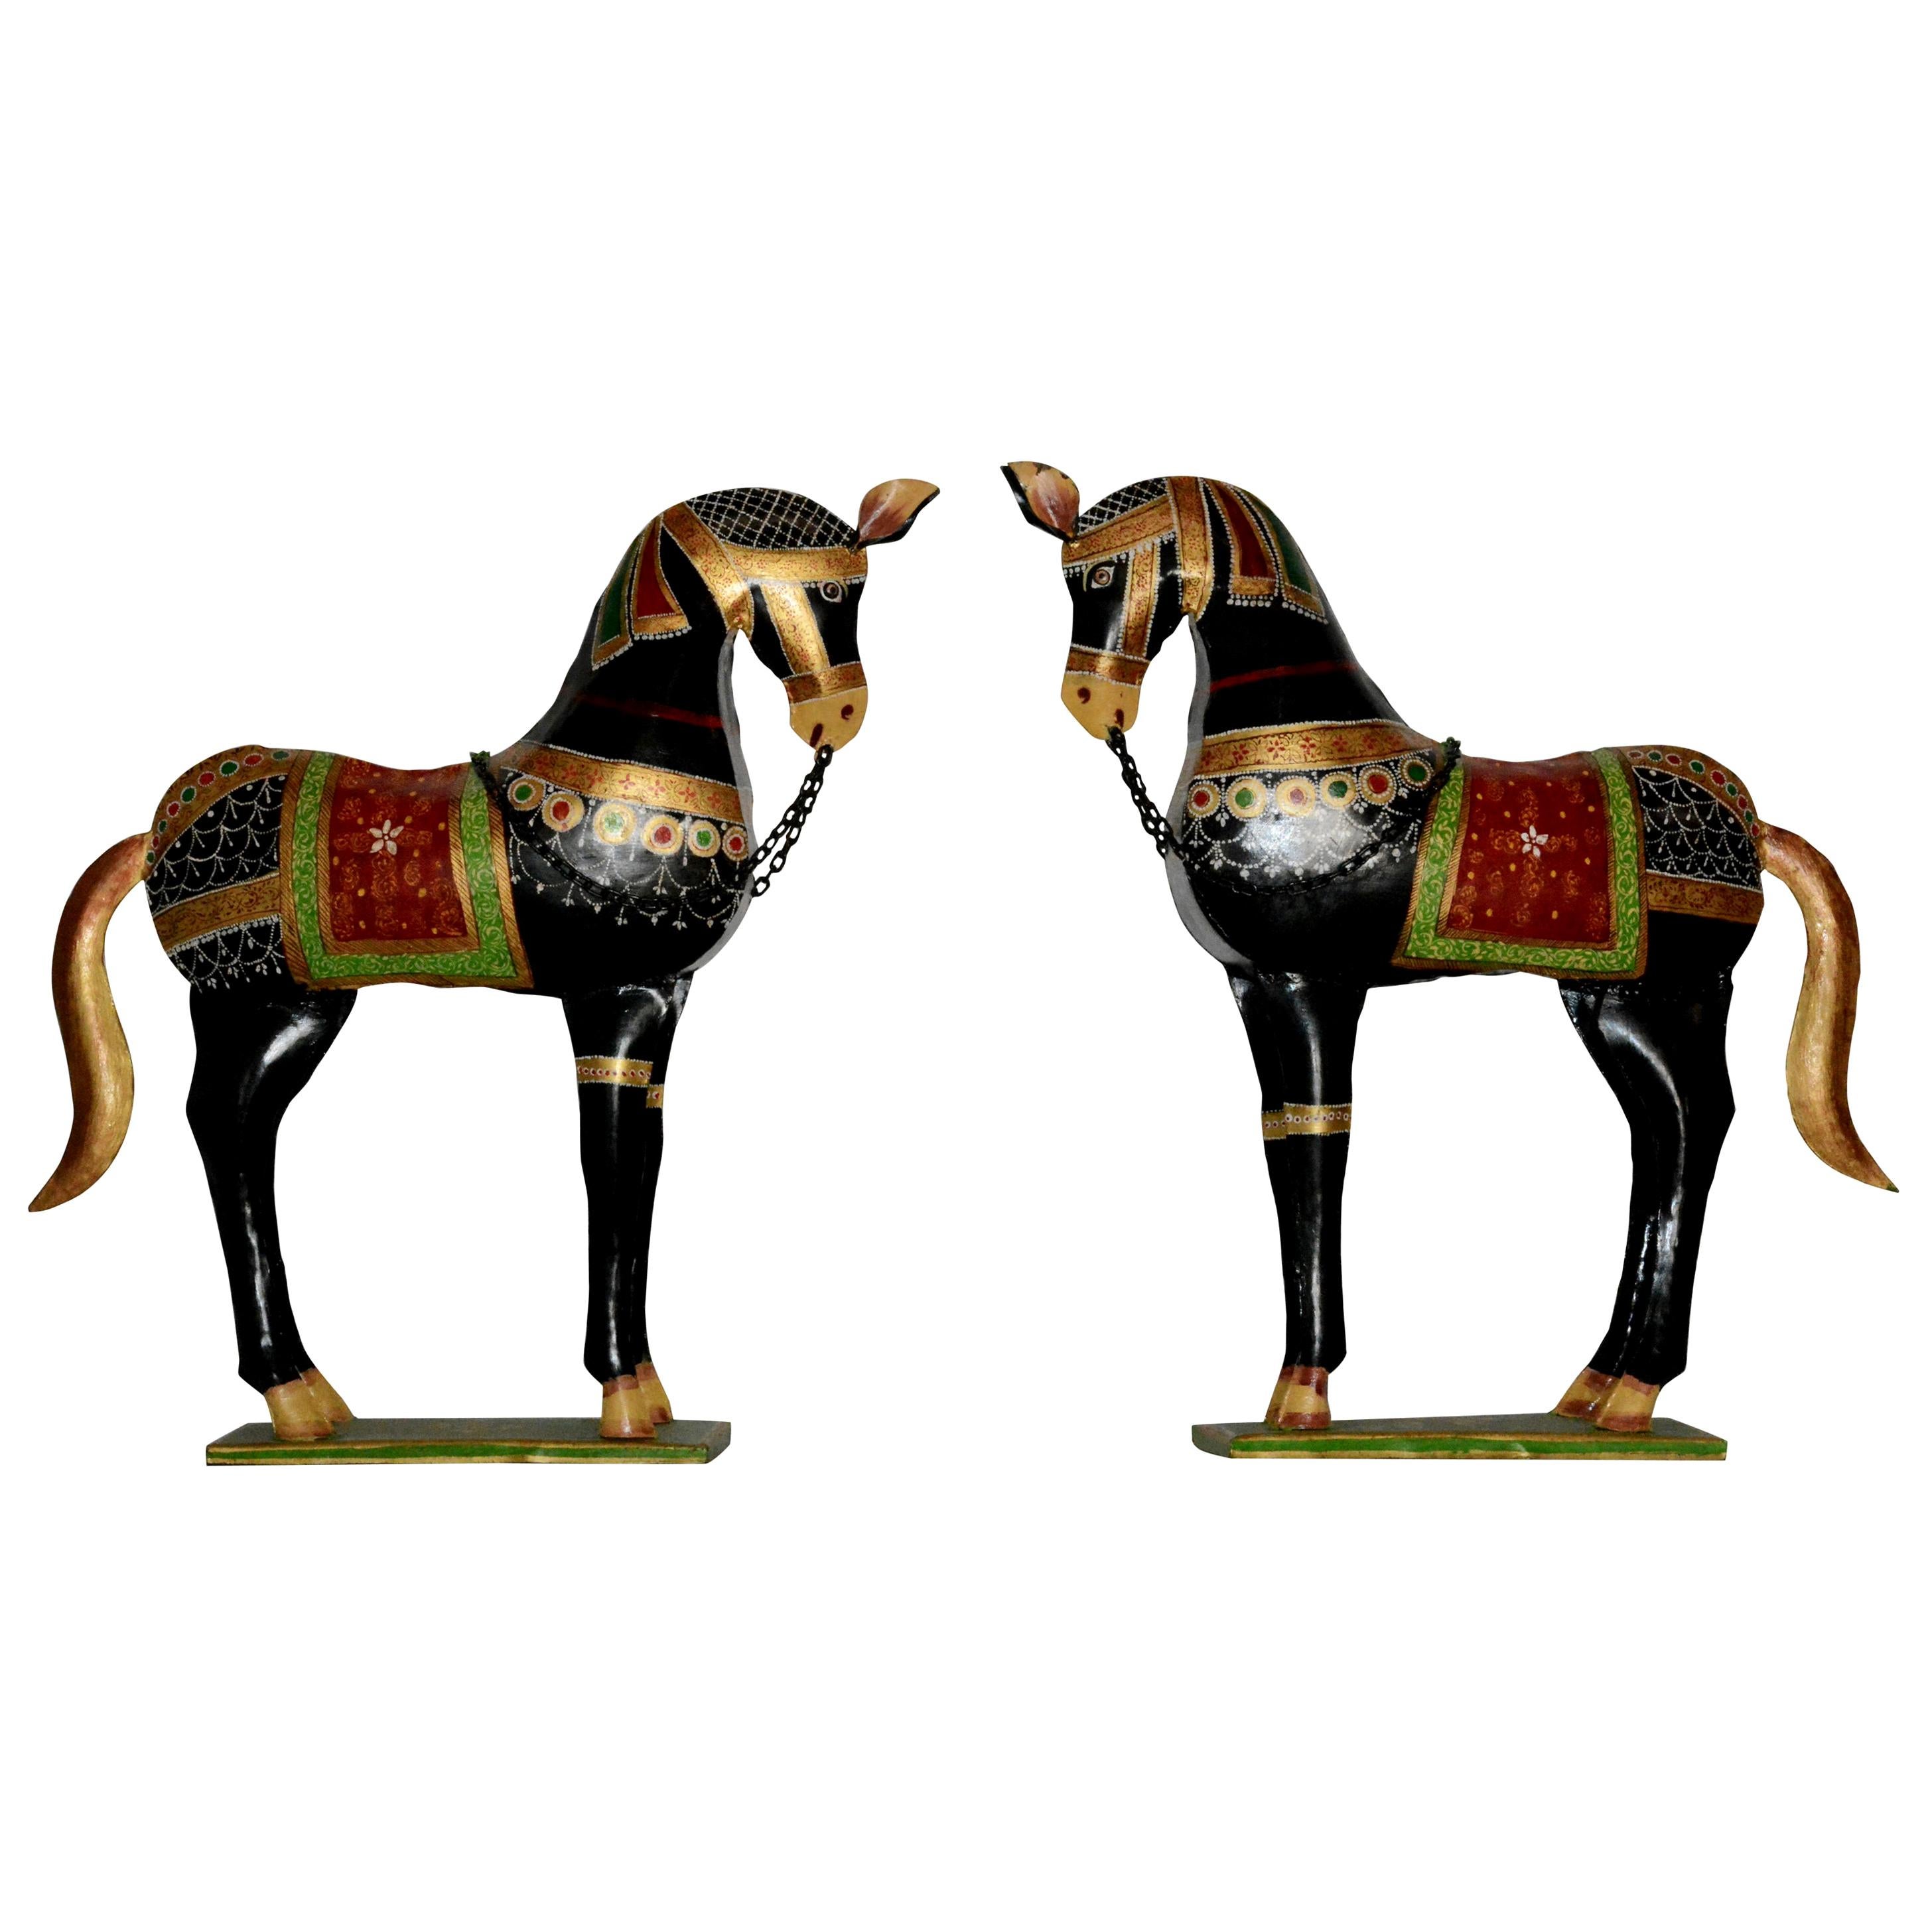 20th Century Decorative Parcel-Gilt and Polychrome Metal Horses For Sale